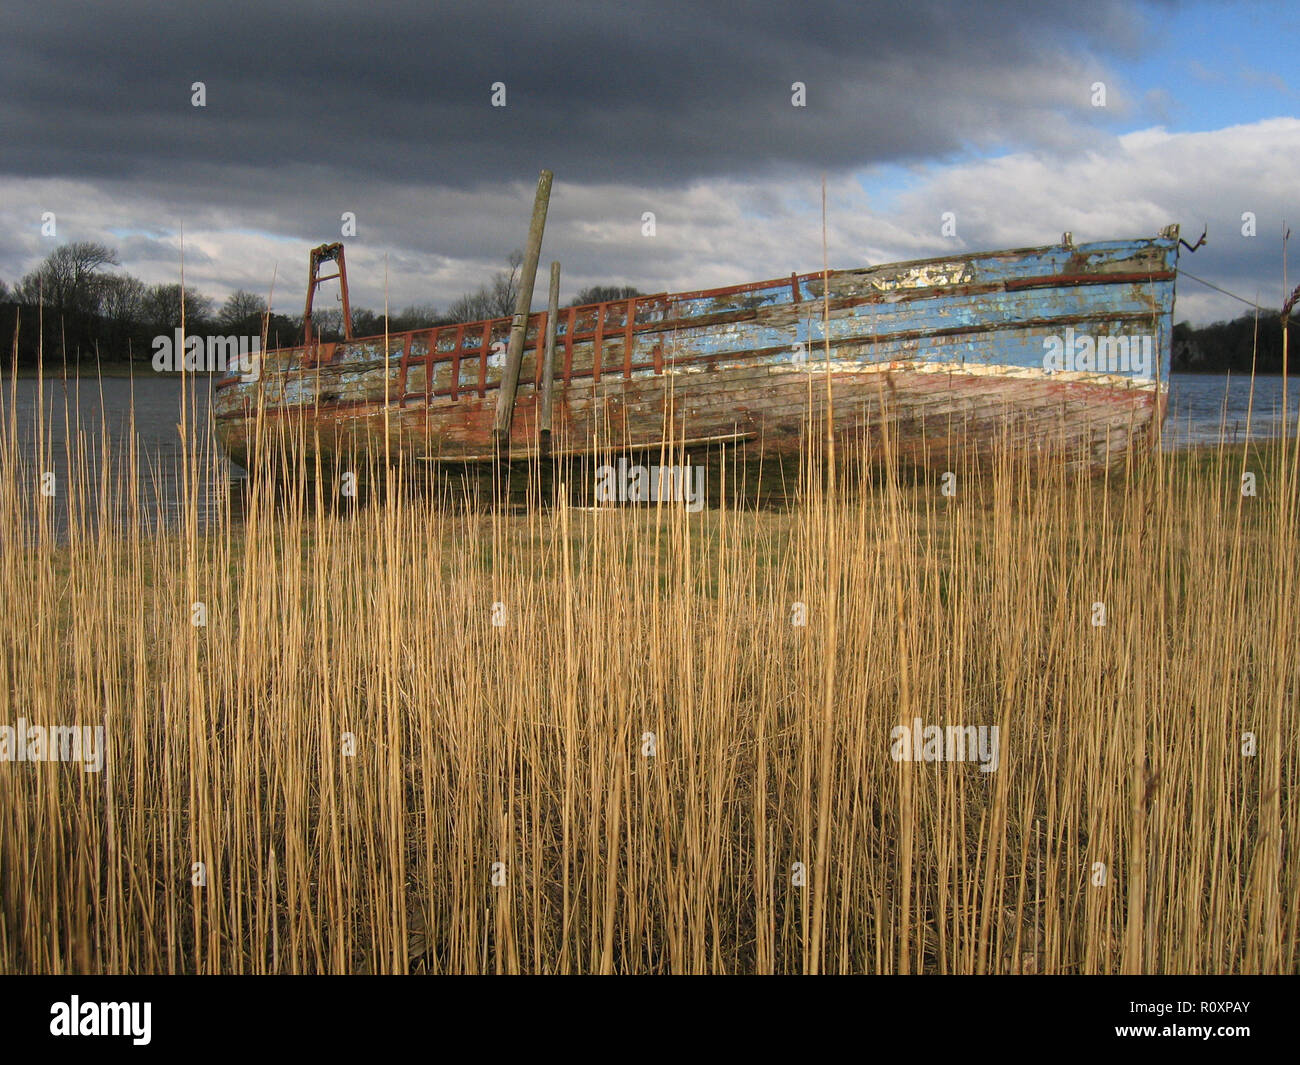 The hulk of the old wooden boat 'Wellspring' among the reed beds on the banks of the River Dee, Kirkcudbright, Dumfries and Galloway, SW Scotland Stock Photo